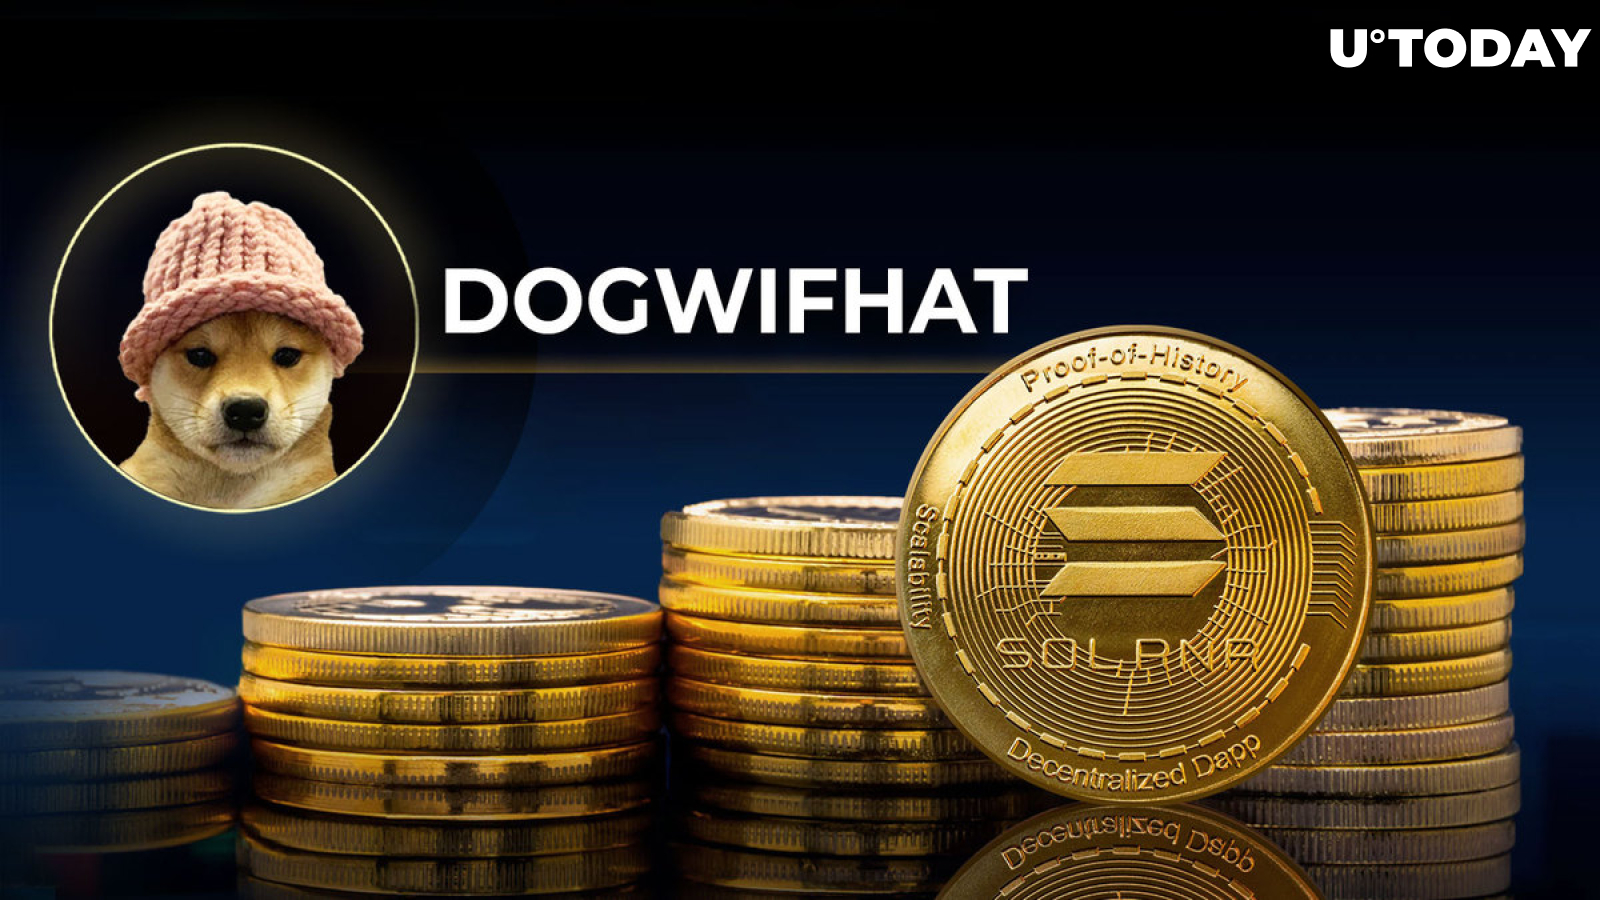 20,000% Growth? New Solana Meme Coin Dogwifhat (WIF) Defies Logic and Reality